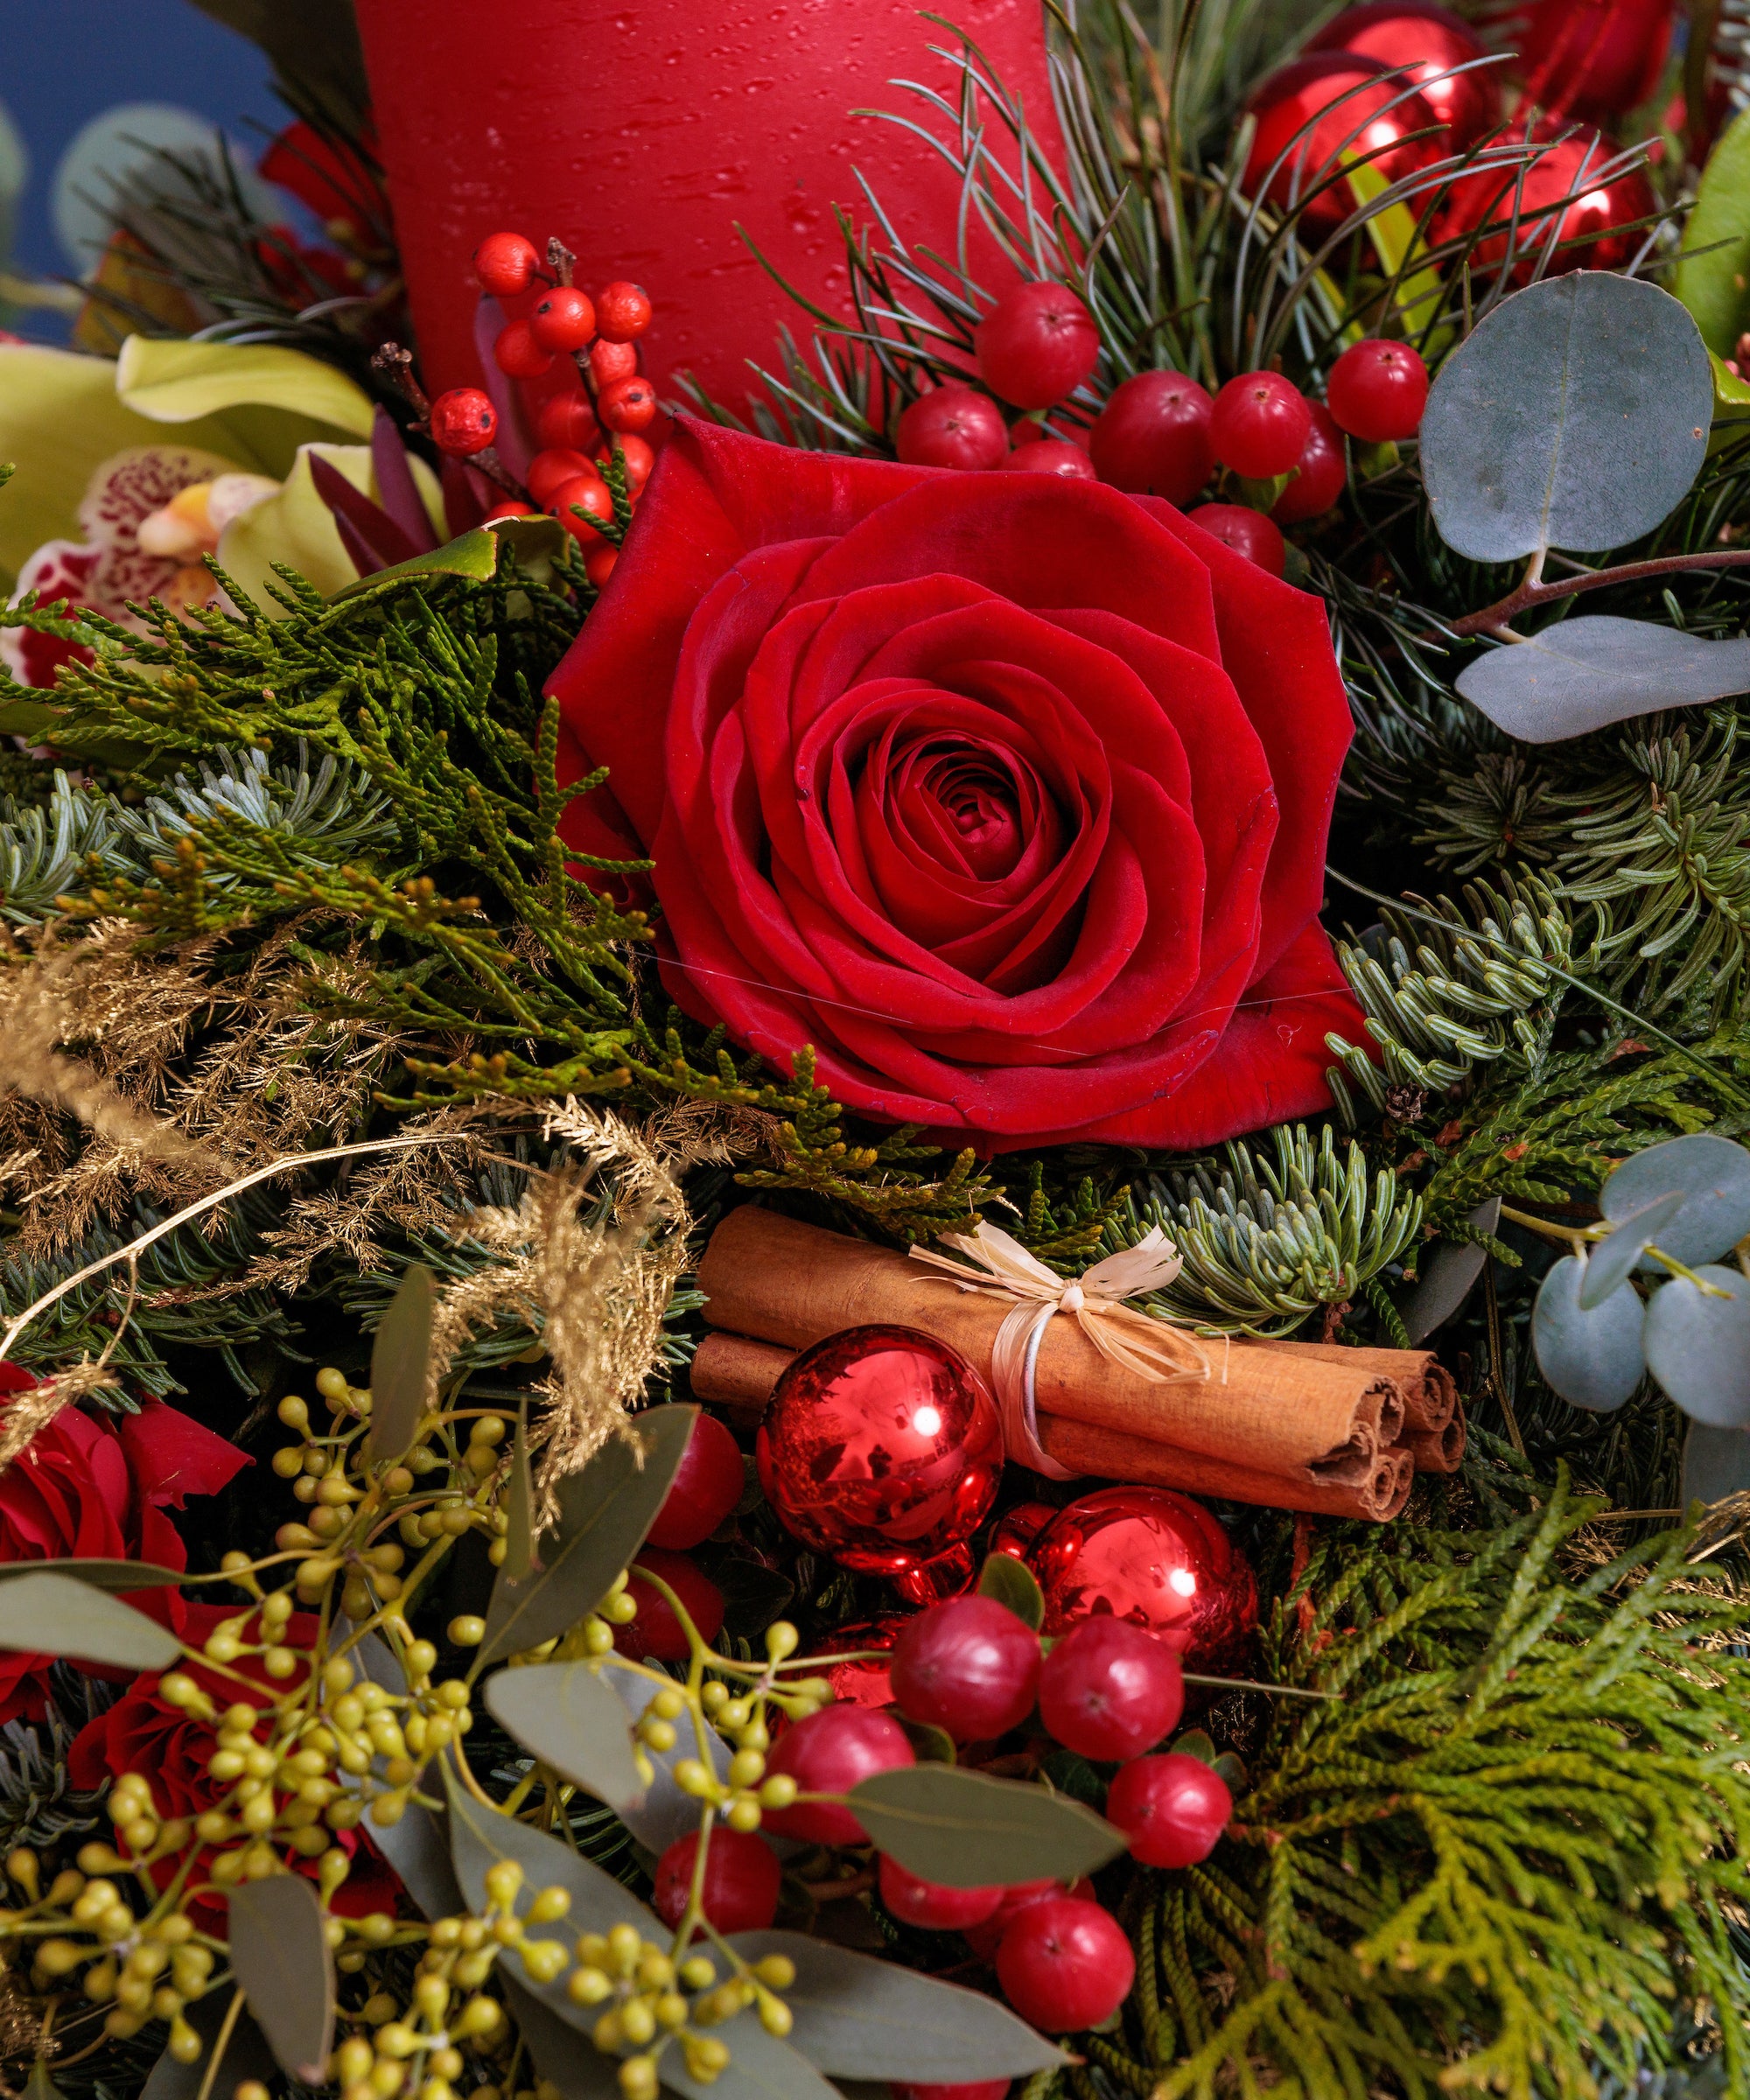 Christmas Dinner Table Arrangement with Red Candle